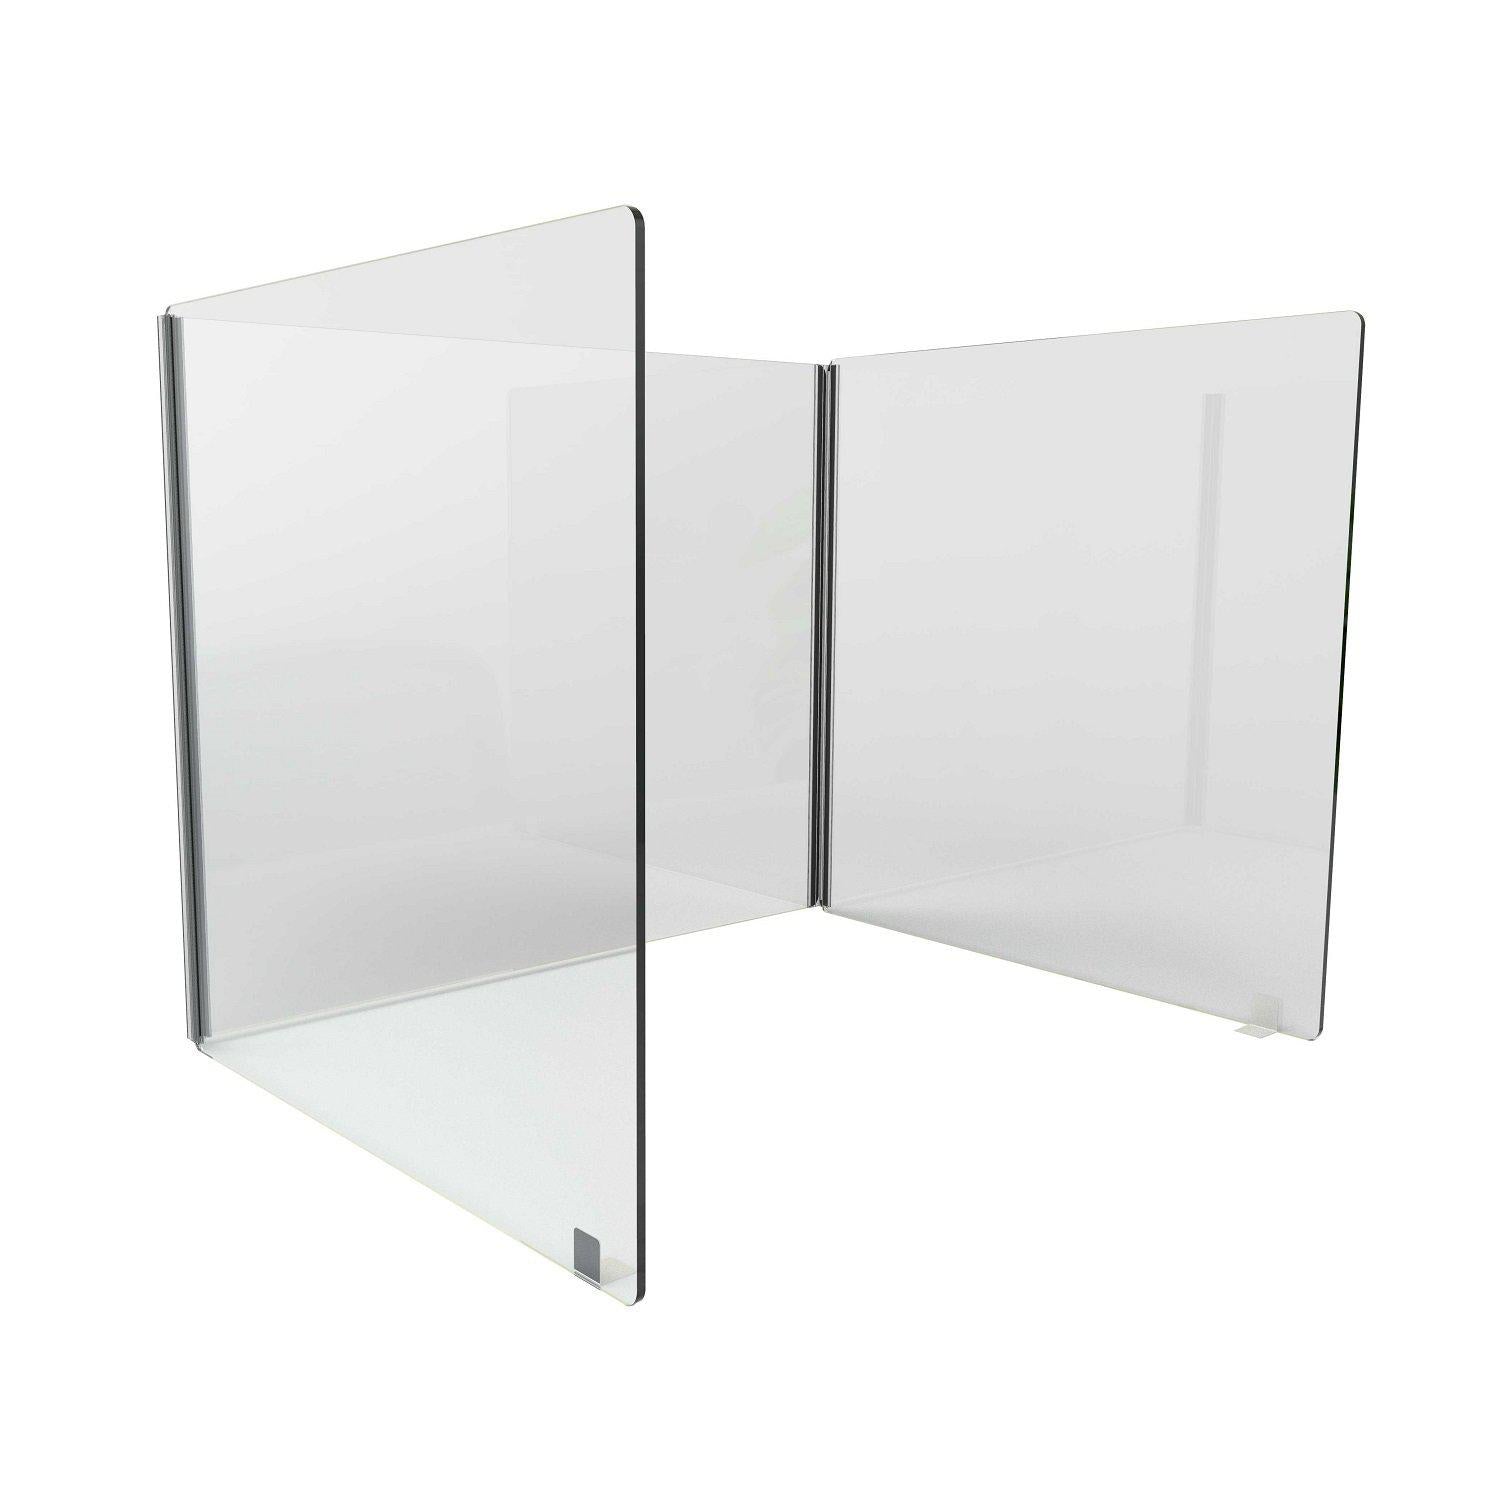 3-Sided Clear Thermoplastic Desktop Protection Screen/Sneeze Guard, 24”H x 30”W x 24”D